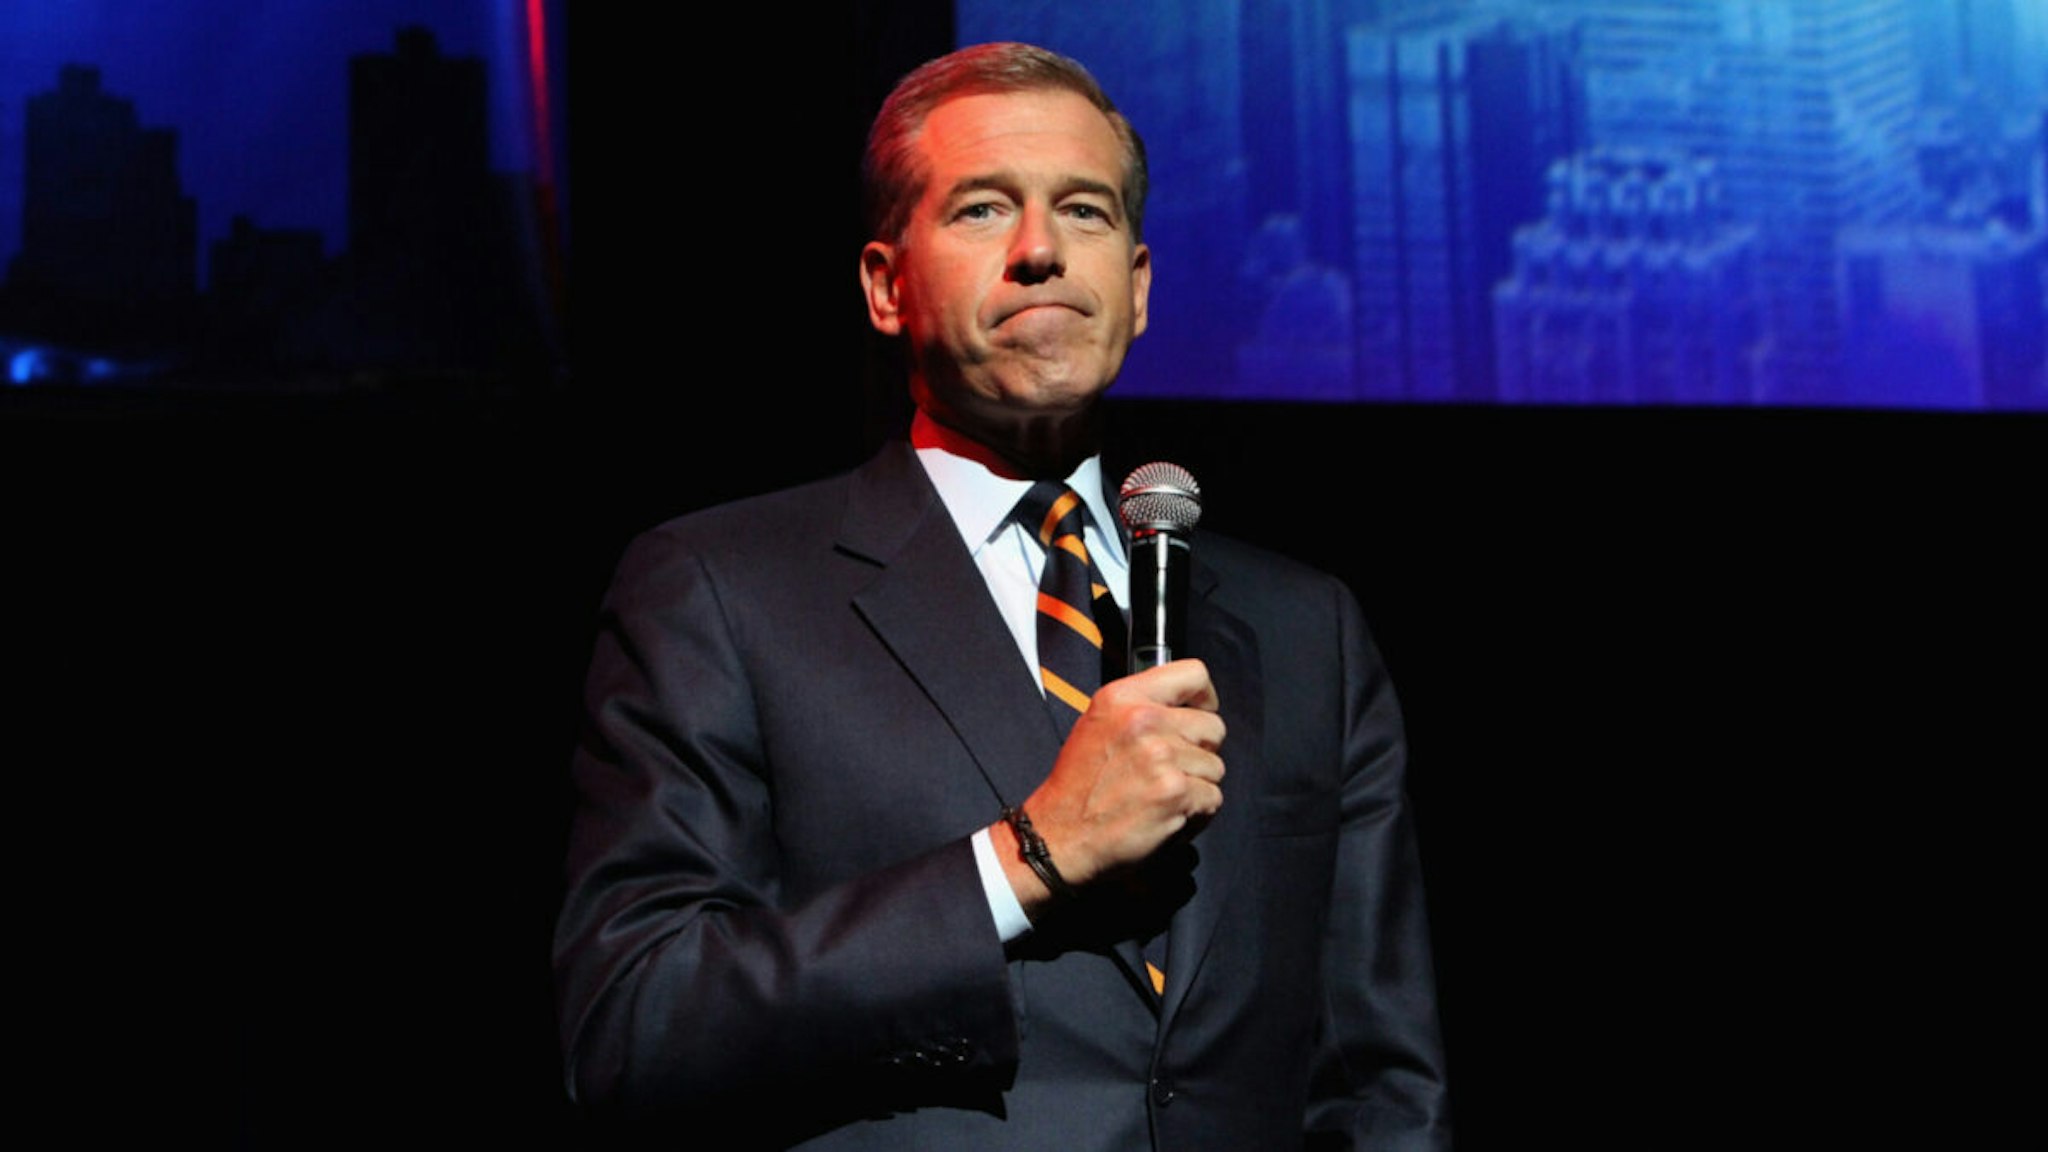 NBC News Anchor Brian Williams speaks onstage at The New York Comedy Festival and The Bob Woodruff Foundation present the 8th Annual Stand Up For Heroes Event at The Theater at Madison Square Garden on November 5, 2014 in New York City.